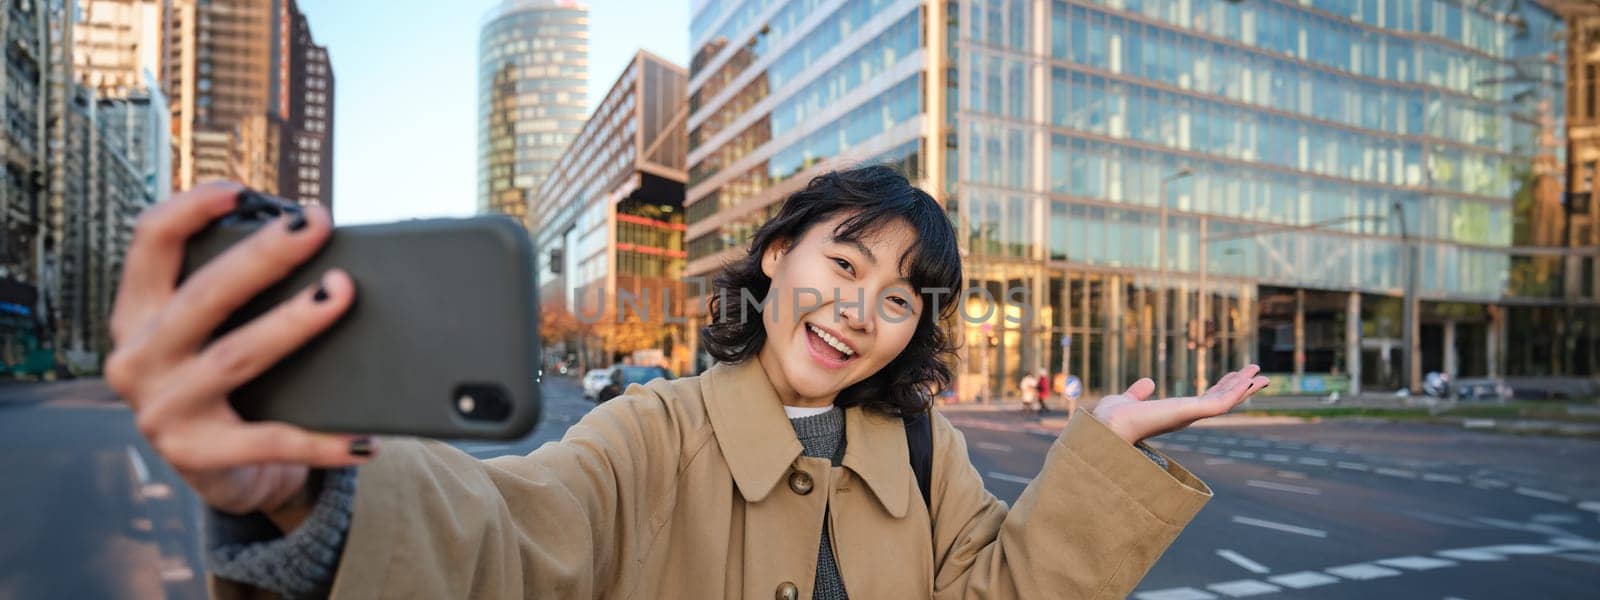 Upbeat asian girl takes selfie with smartphone in city centre, showing something behind her with smiling face. Tourist goes sightseeing by Benzoix